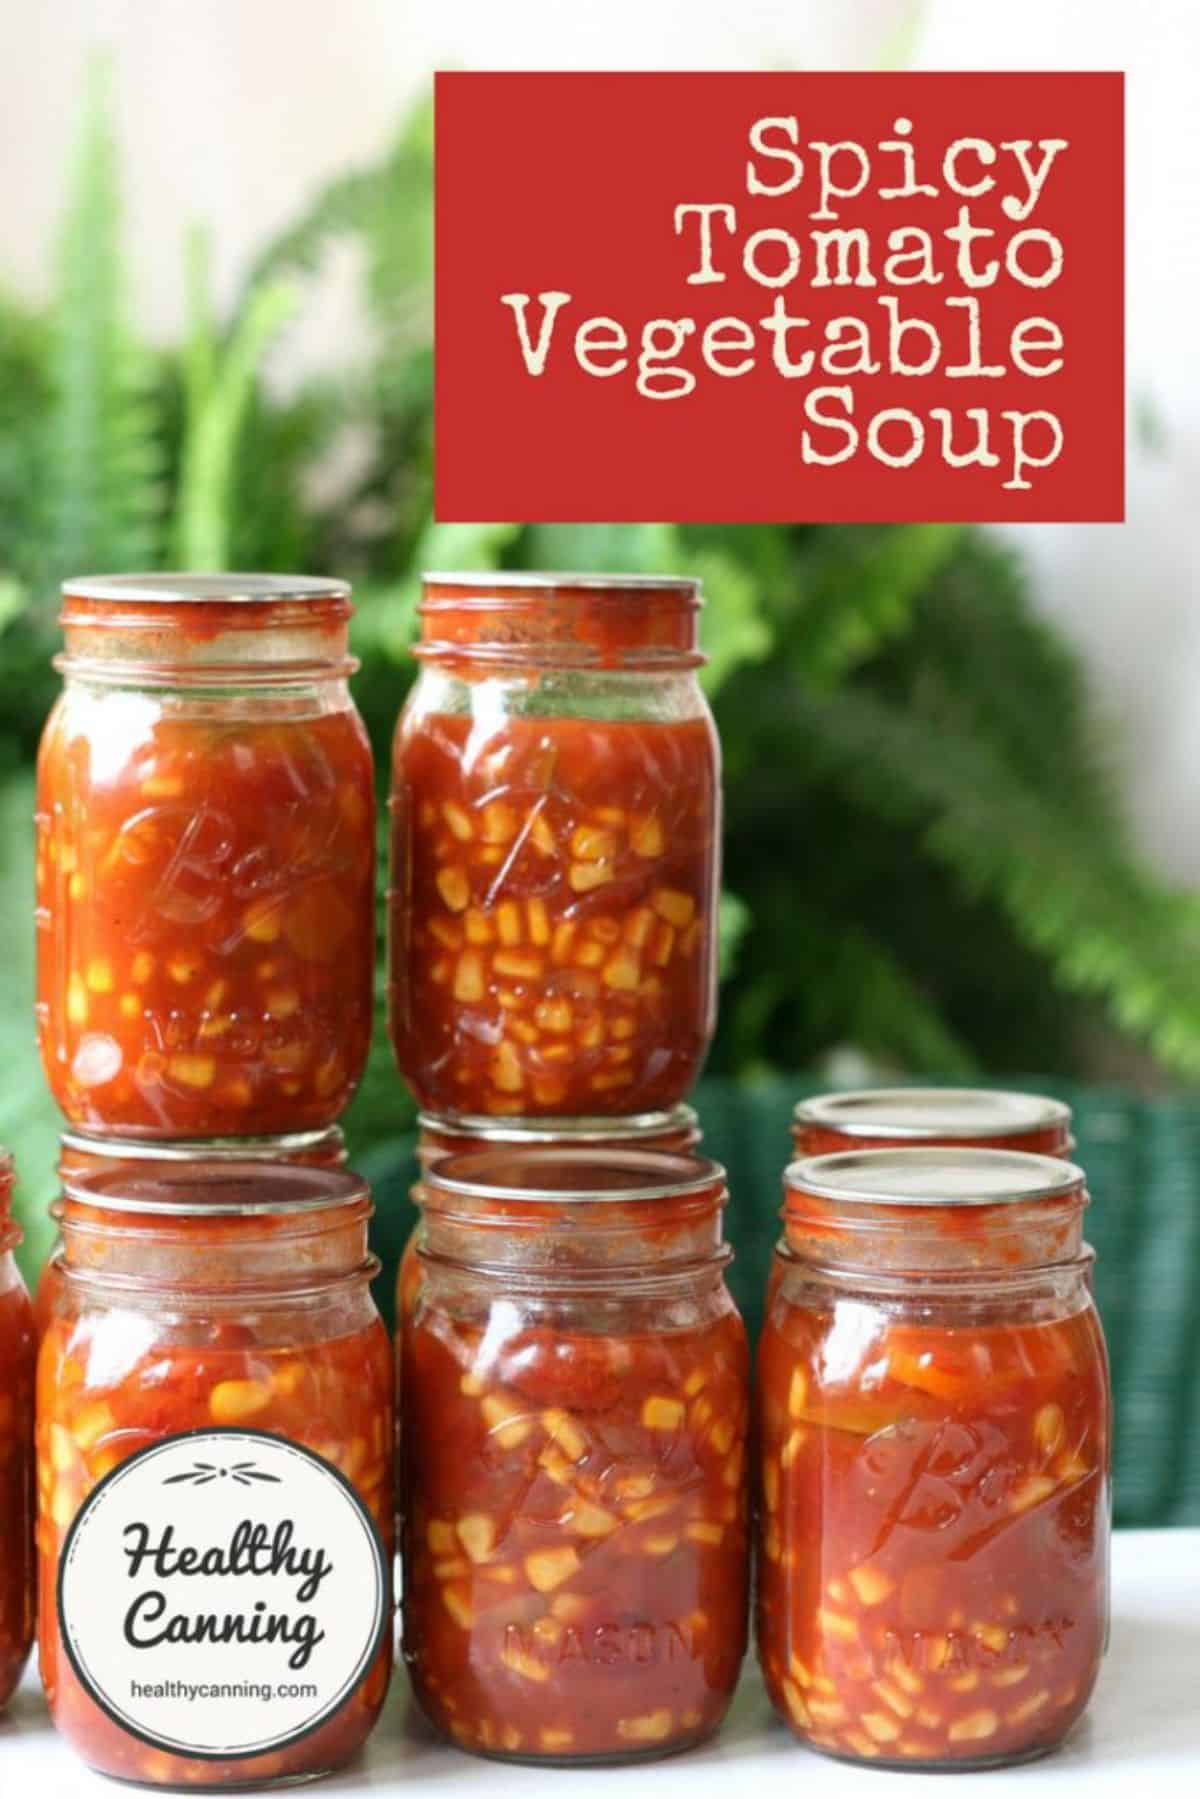 Canned spicy tomato vegetable soup in glass jars.